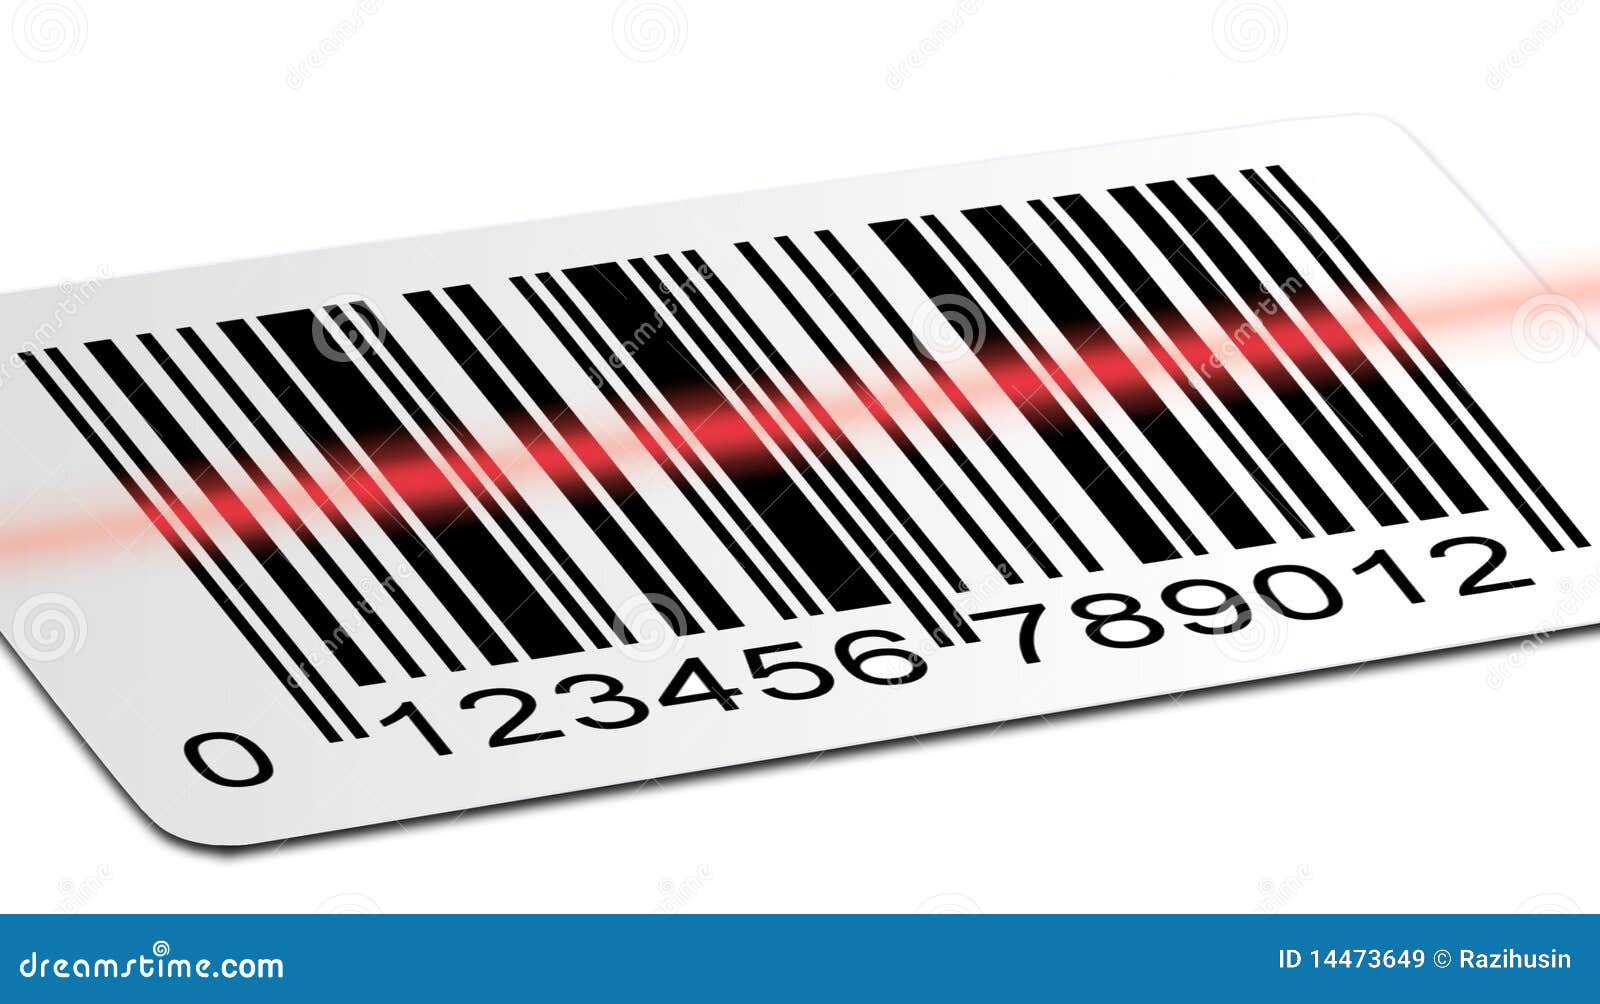 barcode clipart - photo #43